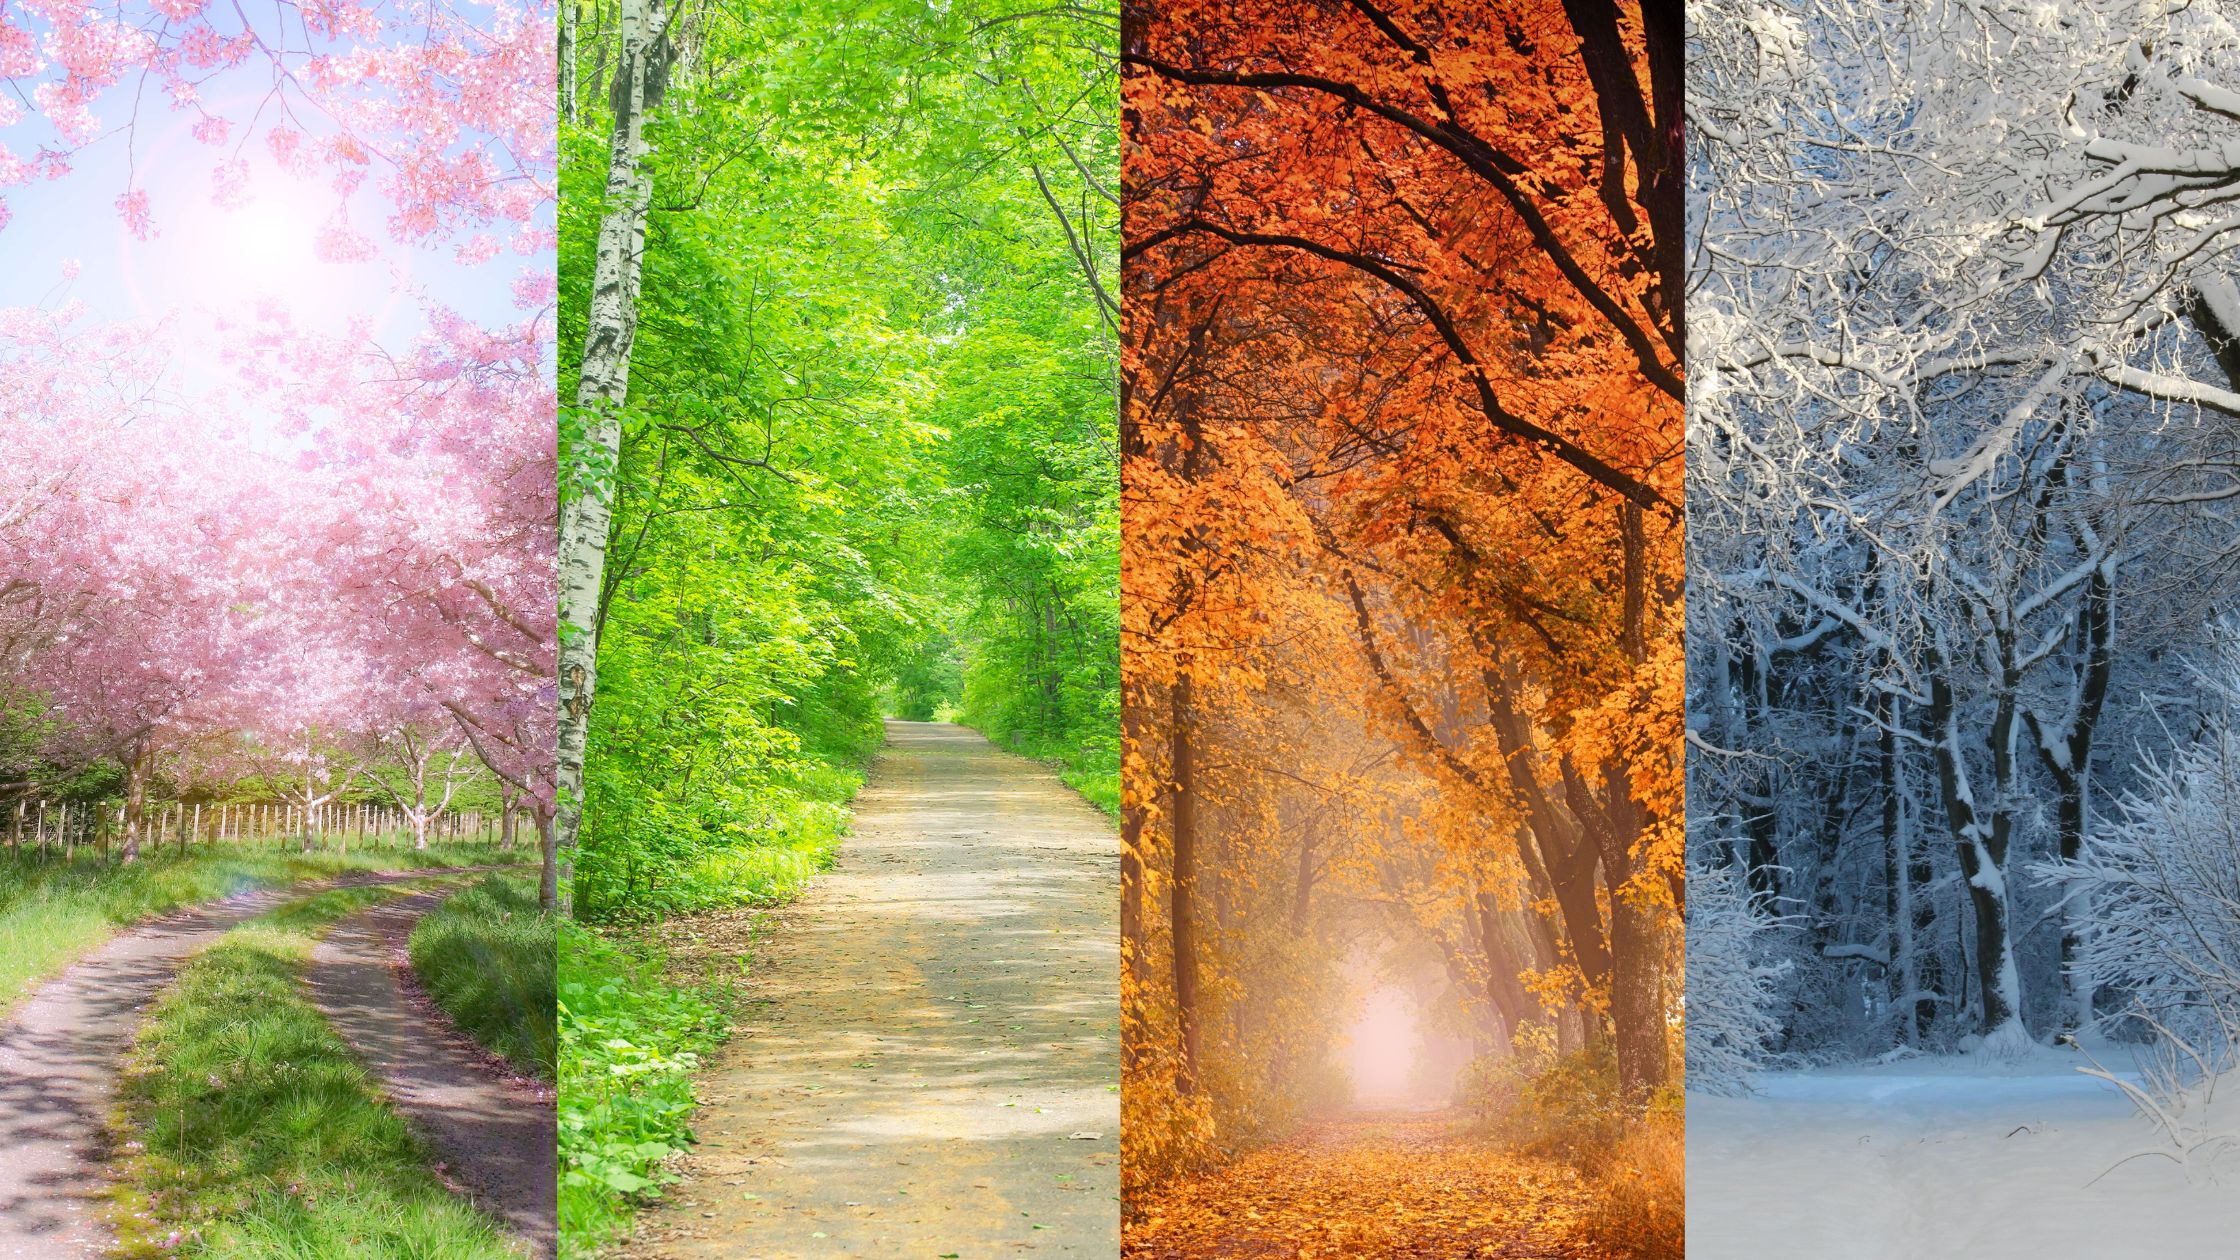 A path through trees in each of the four seasons, left to right. Pink cherry blossom trees. Green trees. Trees with autumn leaves. Snowy trees.